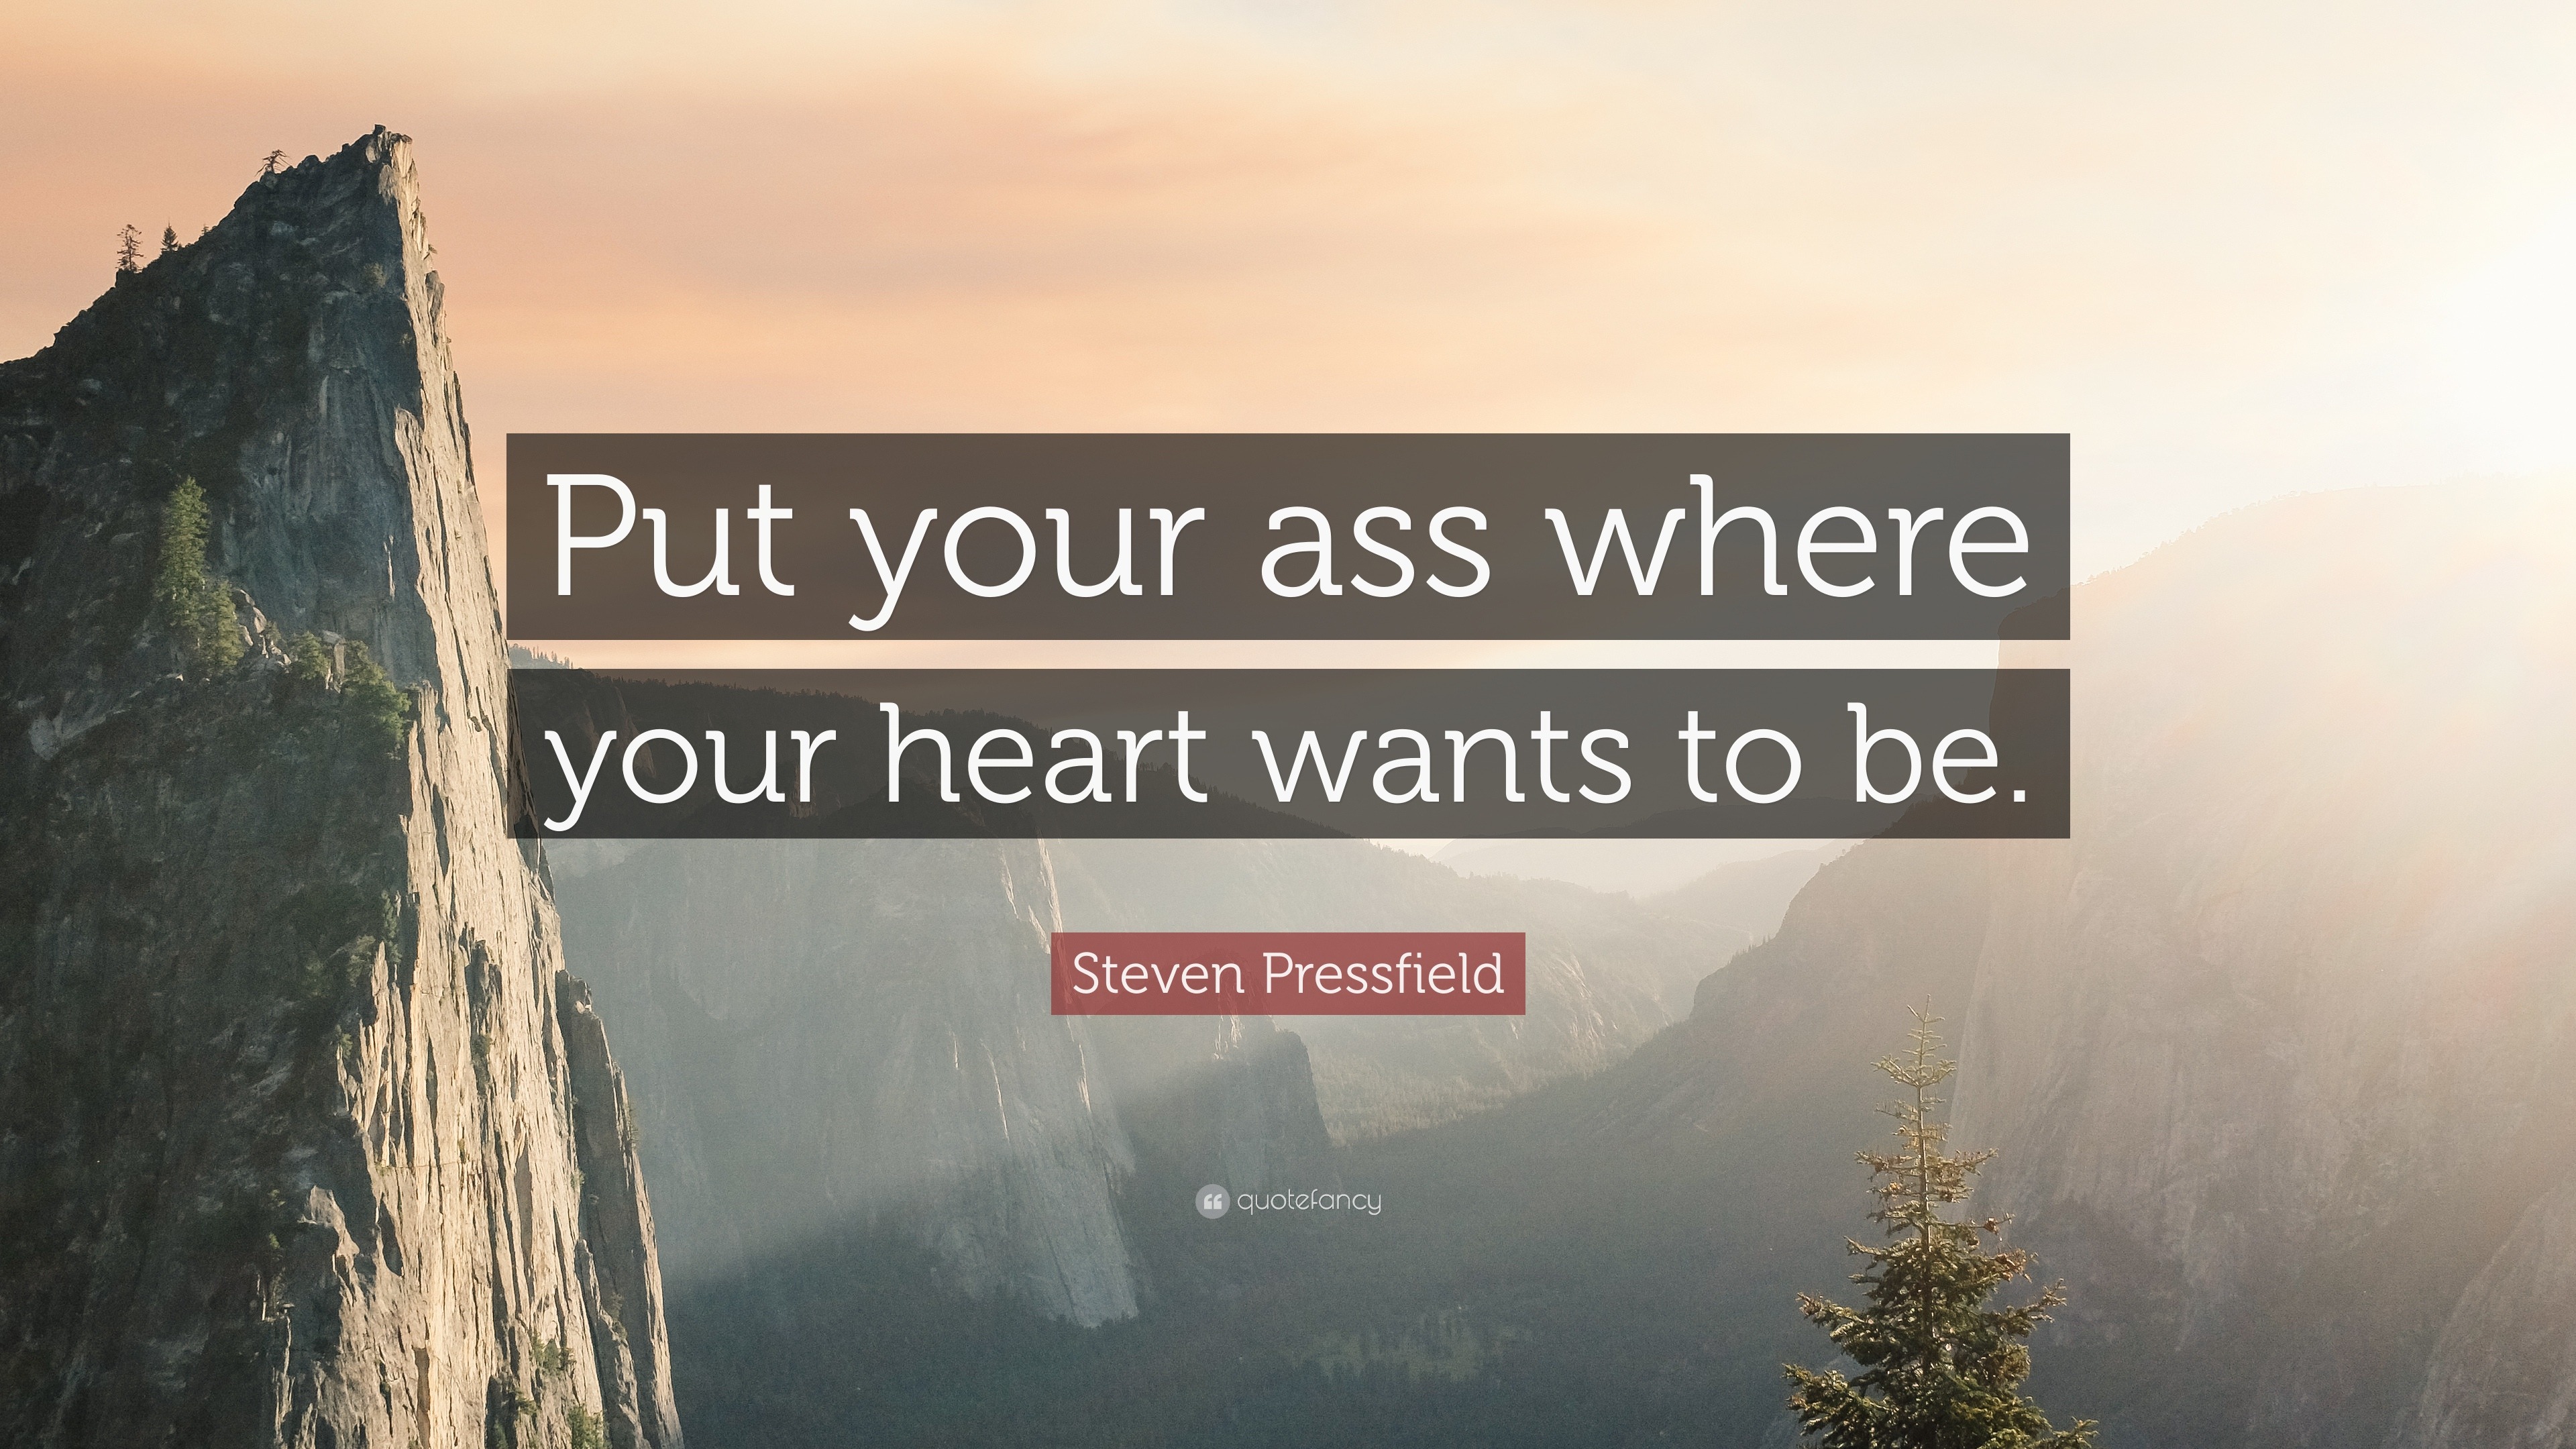 Steven Pressfield: Put Your Ass Where Your Heart Wants to Be